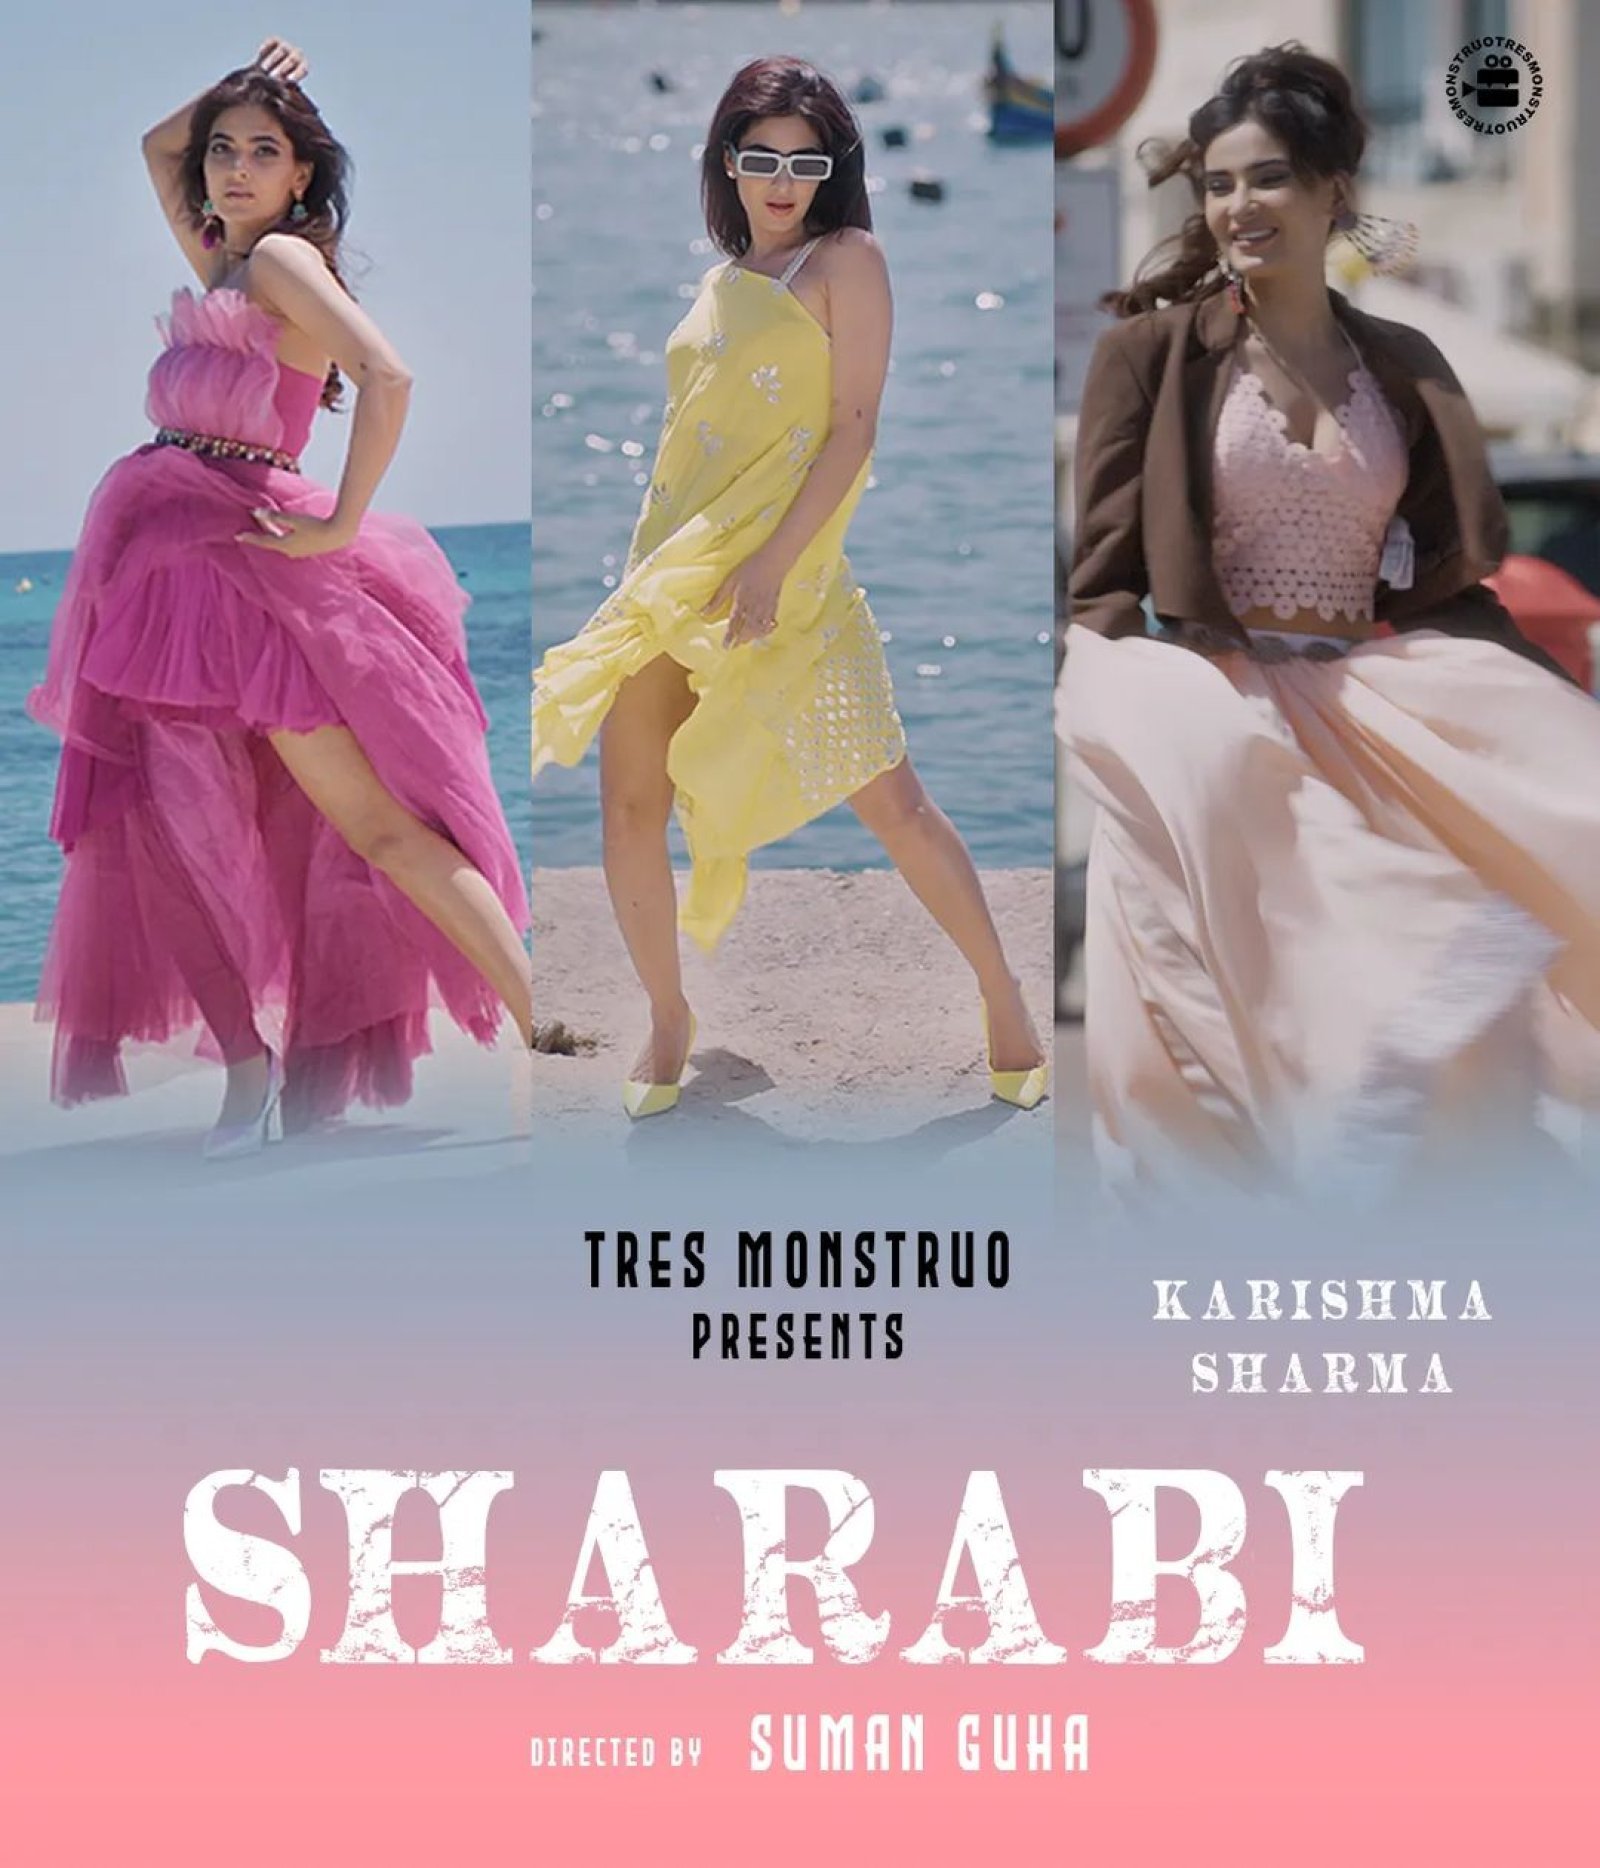 Actor Karishma Sharma Set to Mesmerize Audiences with 'Sharabi', Presented by Tres Monstruo and helmed by the talented director Suman Guha